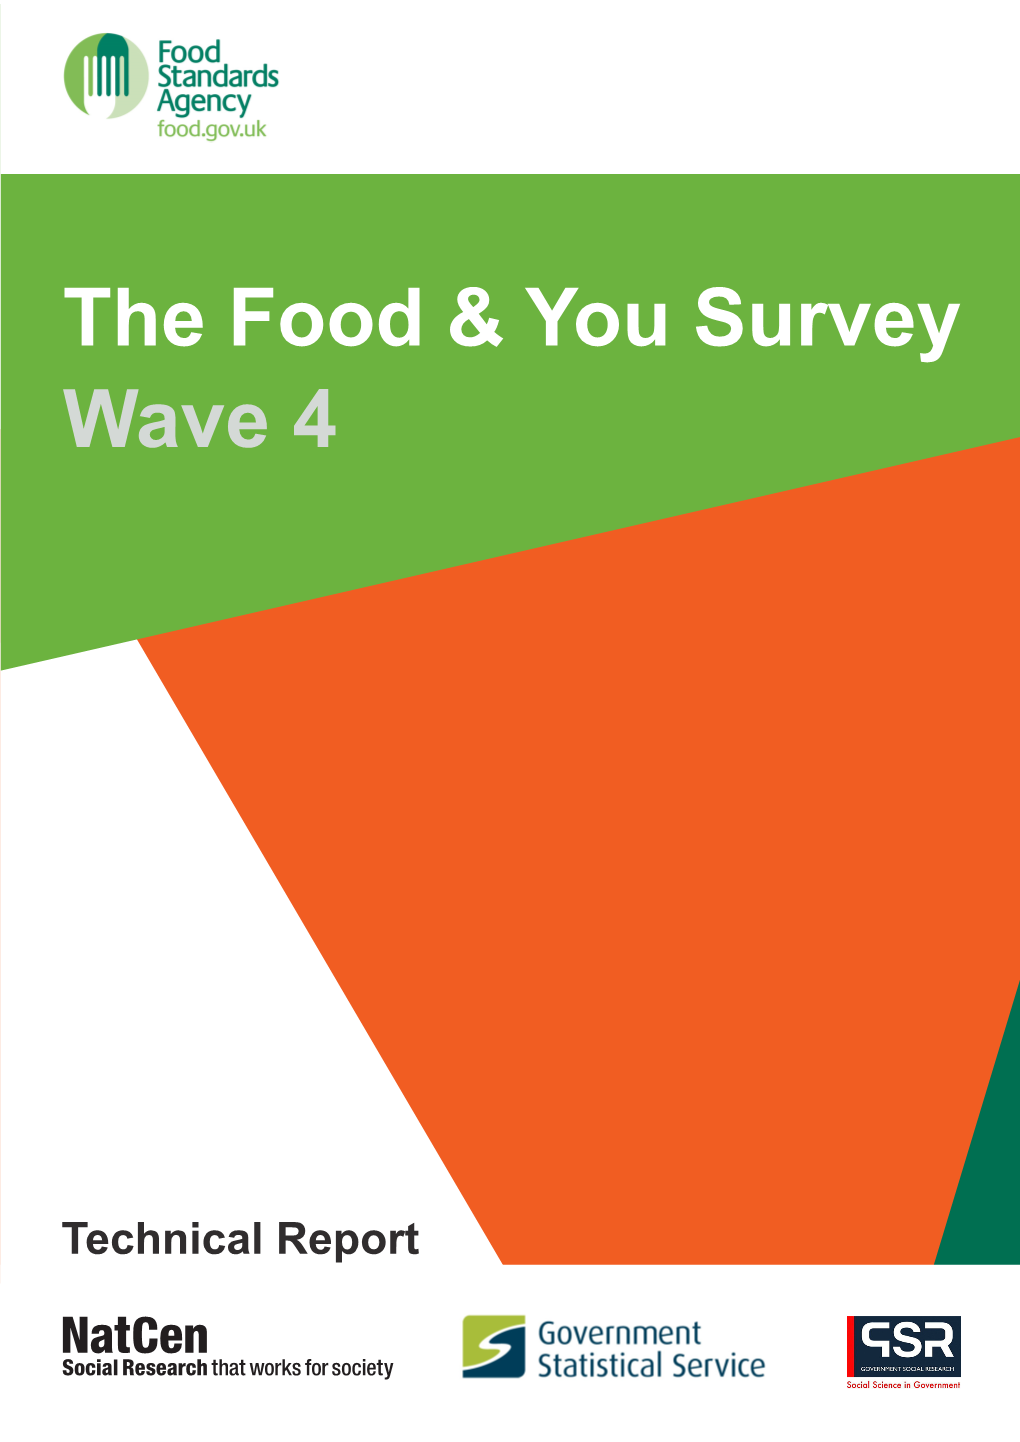 The Food & You Survey Wave 4